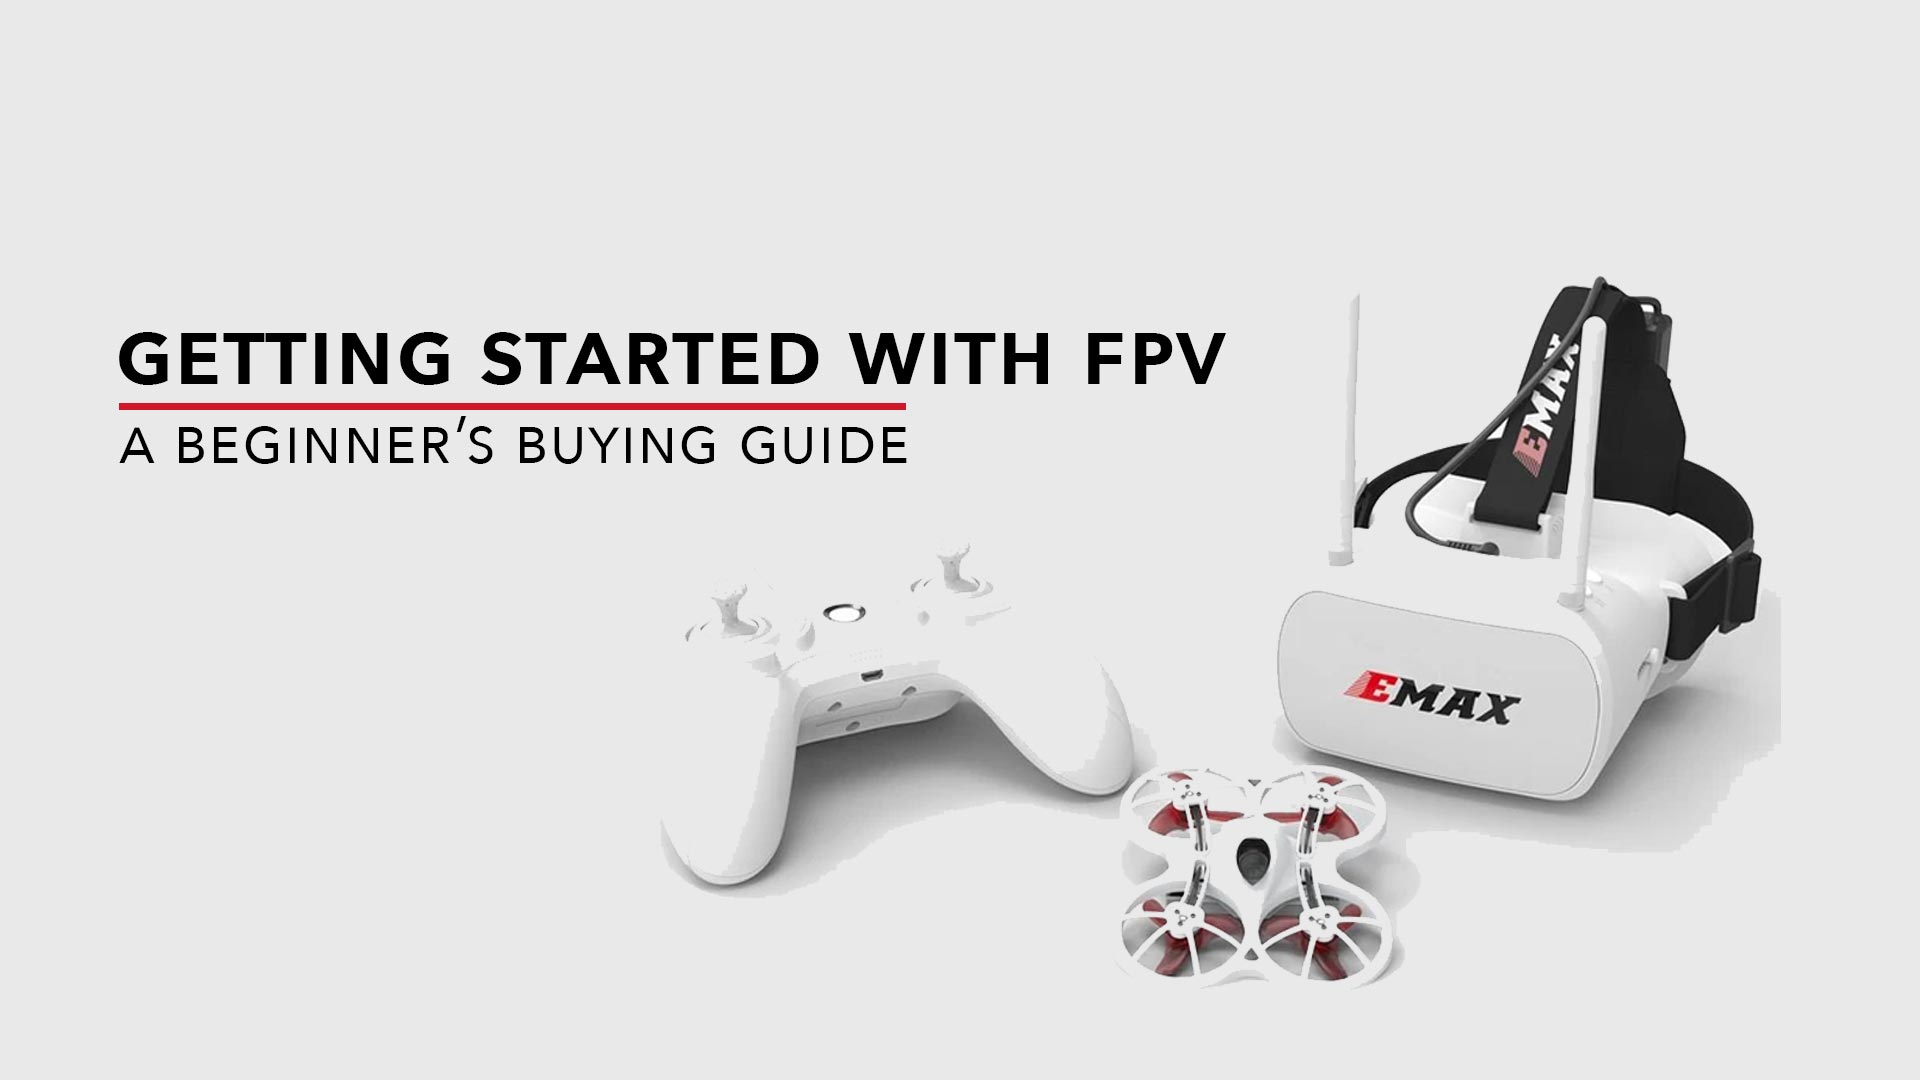 The FPV kit A beginner friendly drone